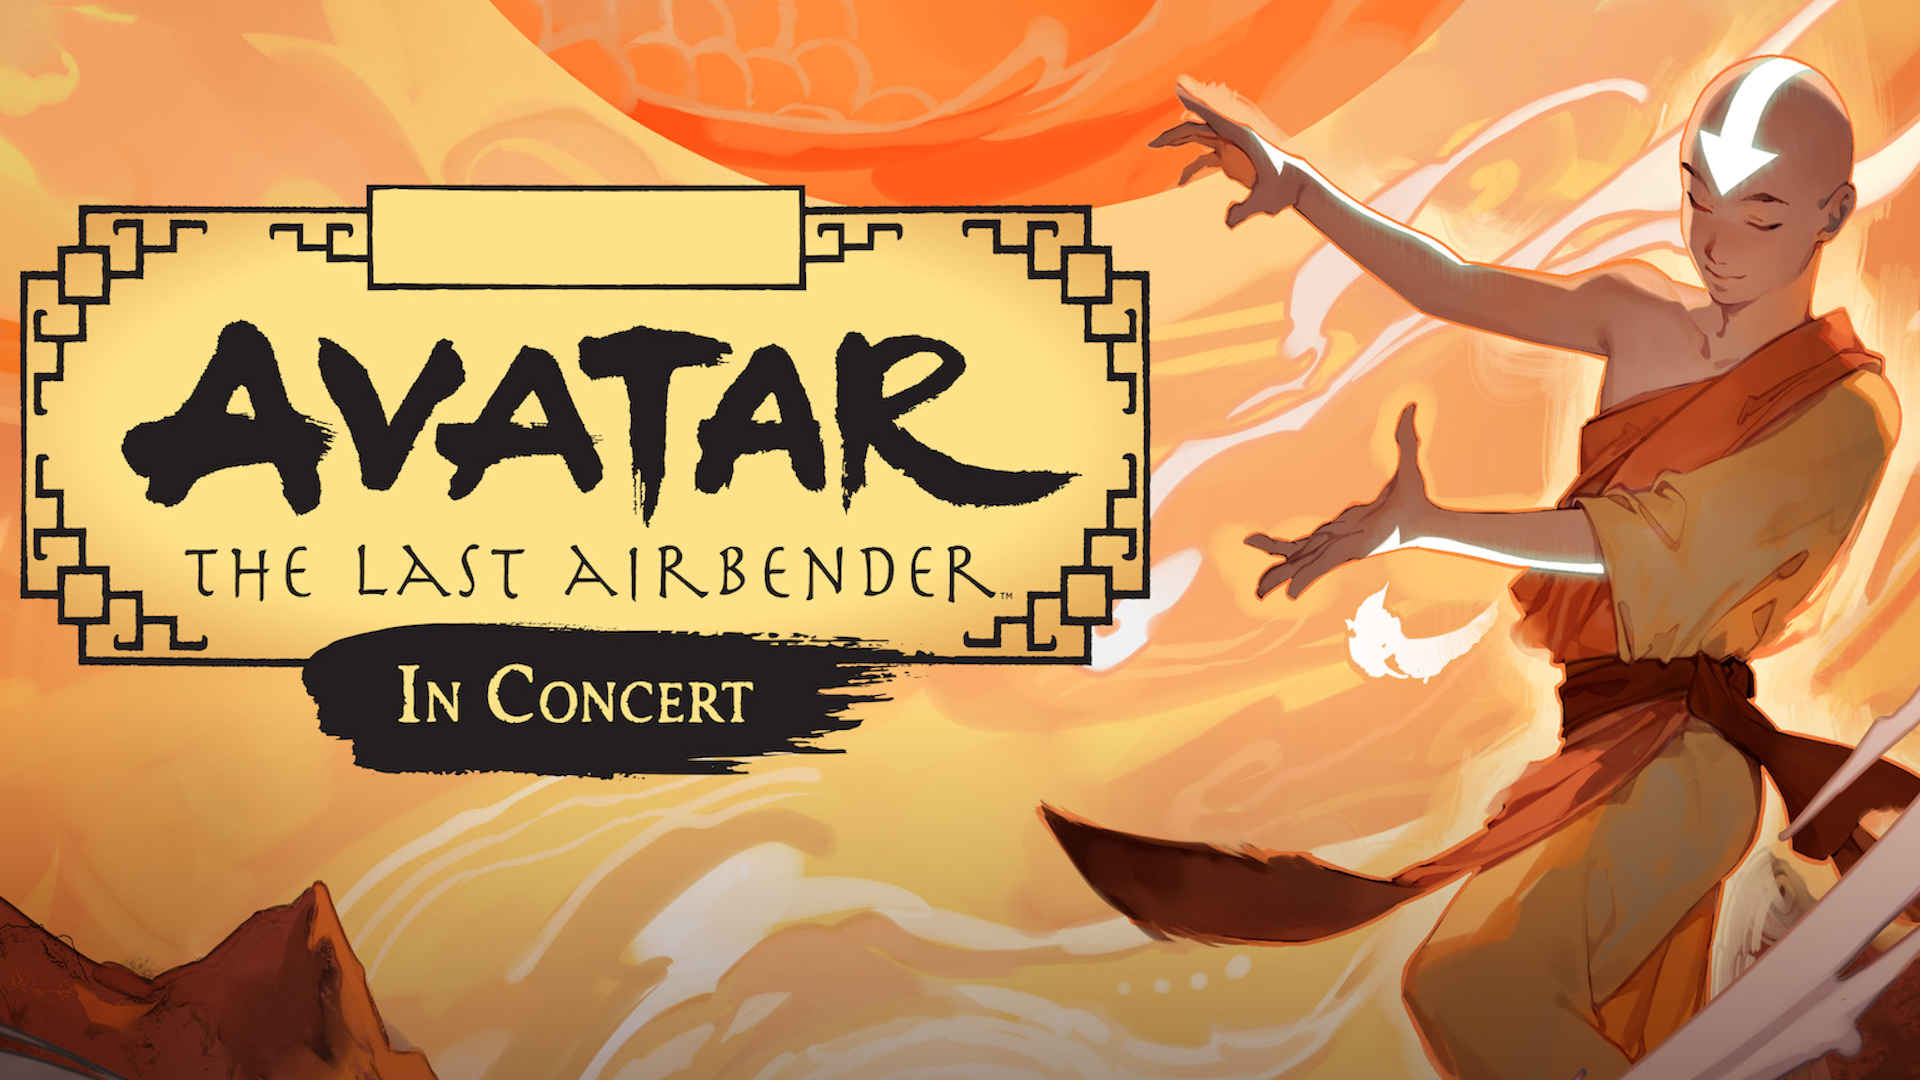 Avatar - The Last Airbender in Concert